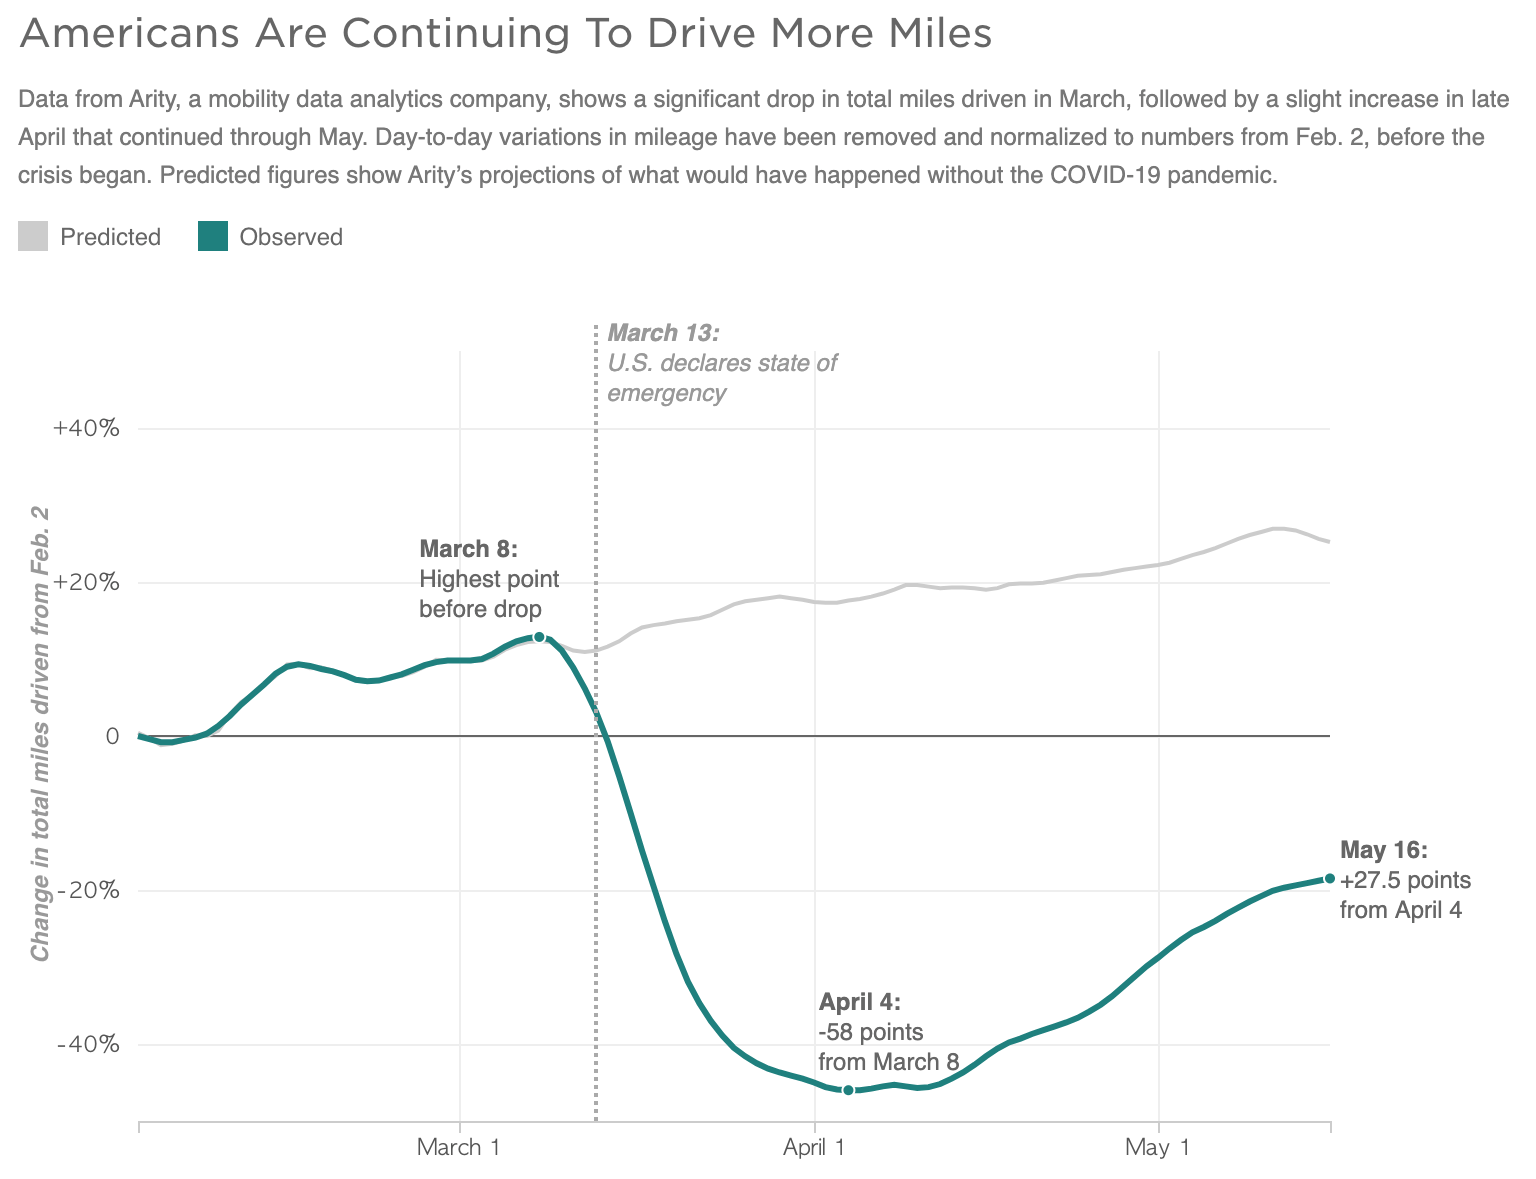 Data from Arity, a mobility data analytics company, shows a significant drop in total miles driven in March, followed by a slight increase in late April that continued through May. Day-to-day variations in mileage have been removed and normalized to numbers from Feb. 2, before the crisis began. Predicted figures show Arity’s projections of what would have happened without the COVID-19 pandemic.